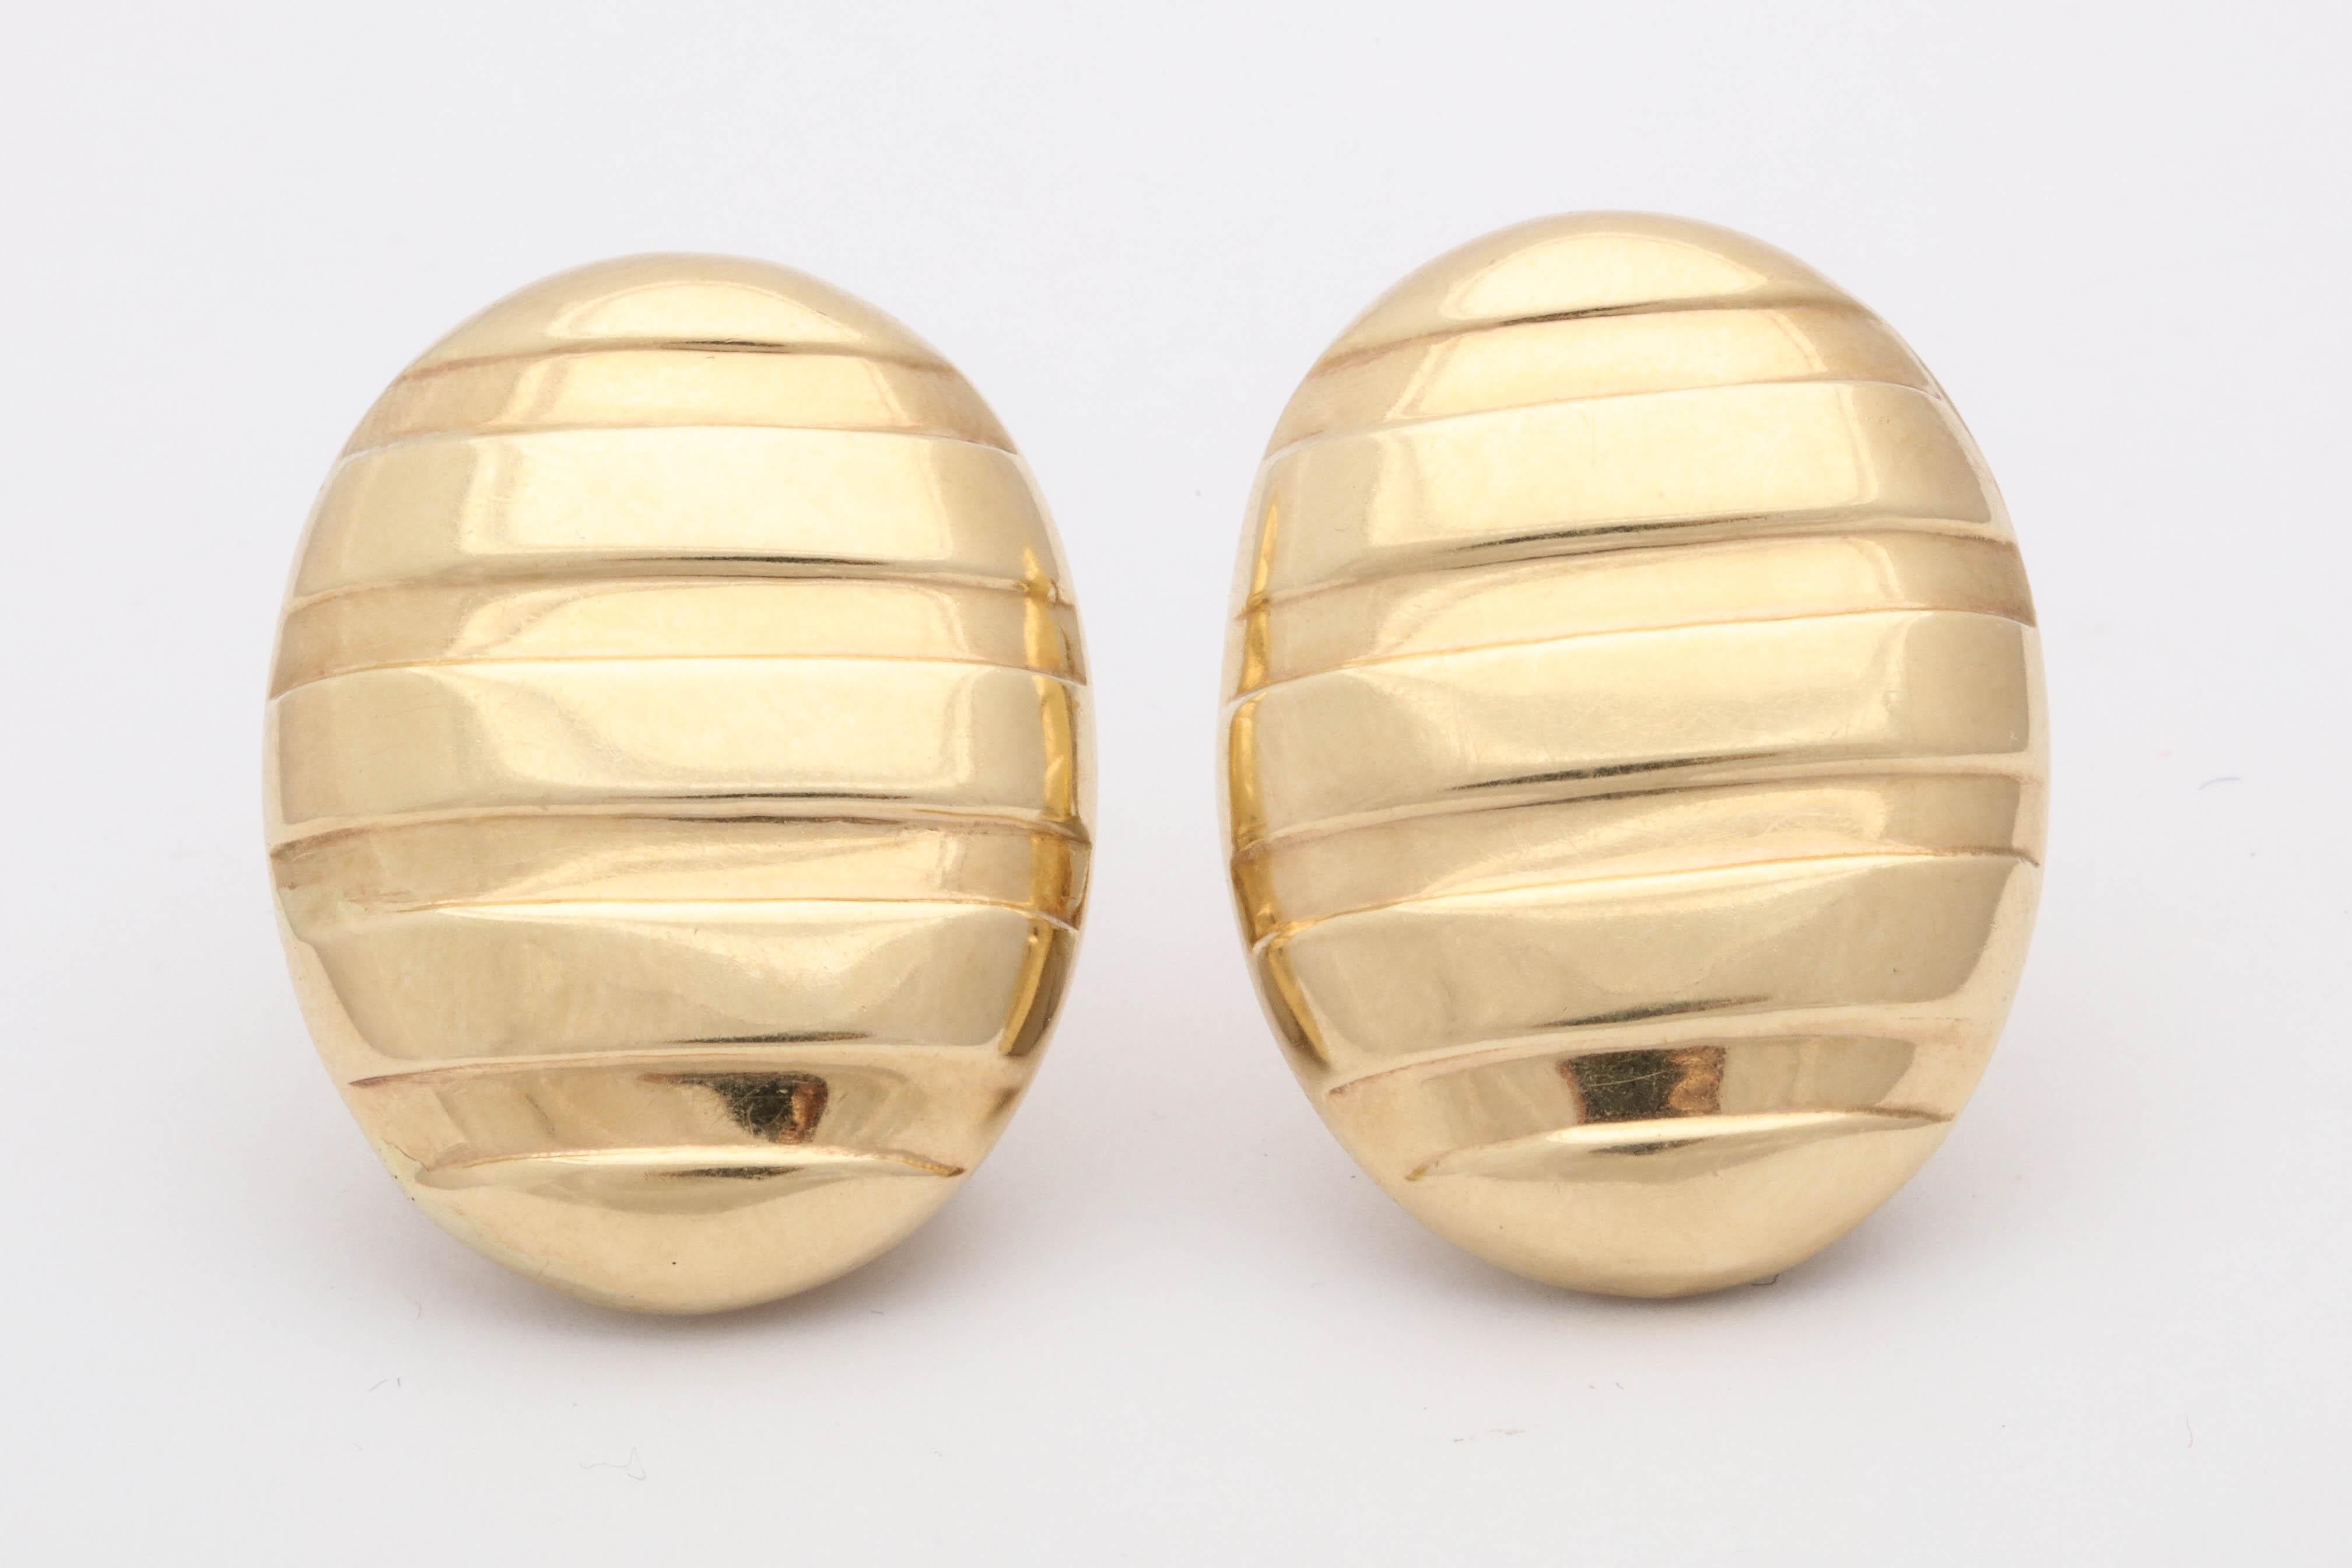 One Pair Of 14kt Yellow Gold High Polish Earclips With Posts Designed With 10 Horizontal Panels For A Textured Ridged Design And Look. NOTE: Posts May Be Removed For Non Pierced Ears ,Made In Italy In The 1980's.